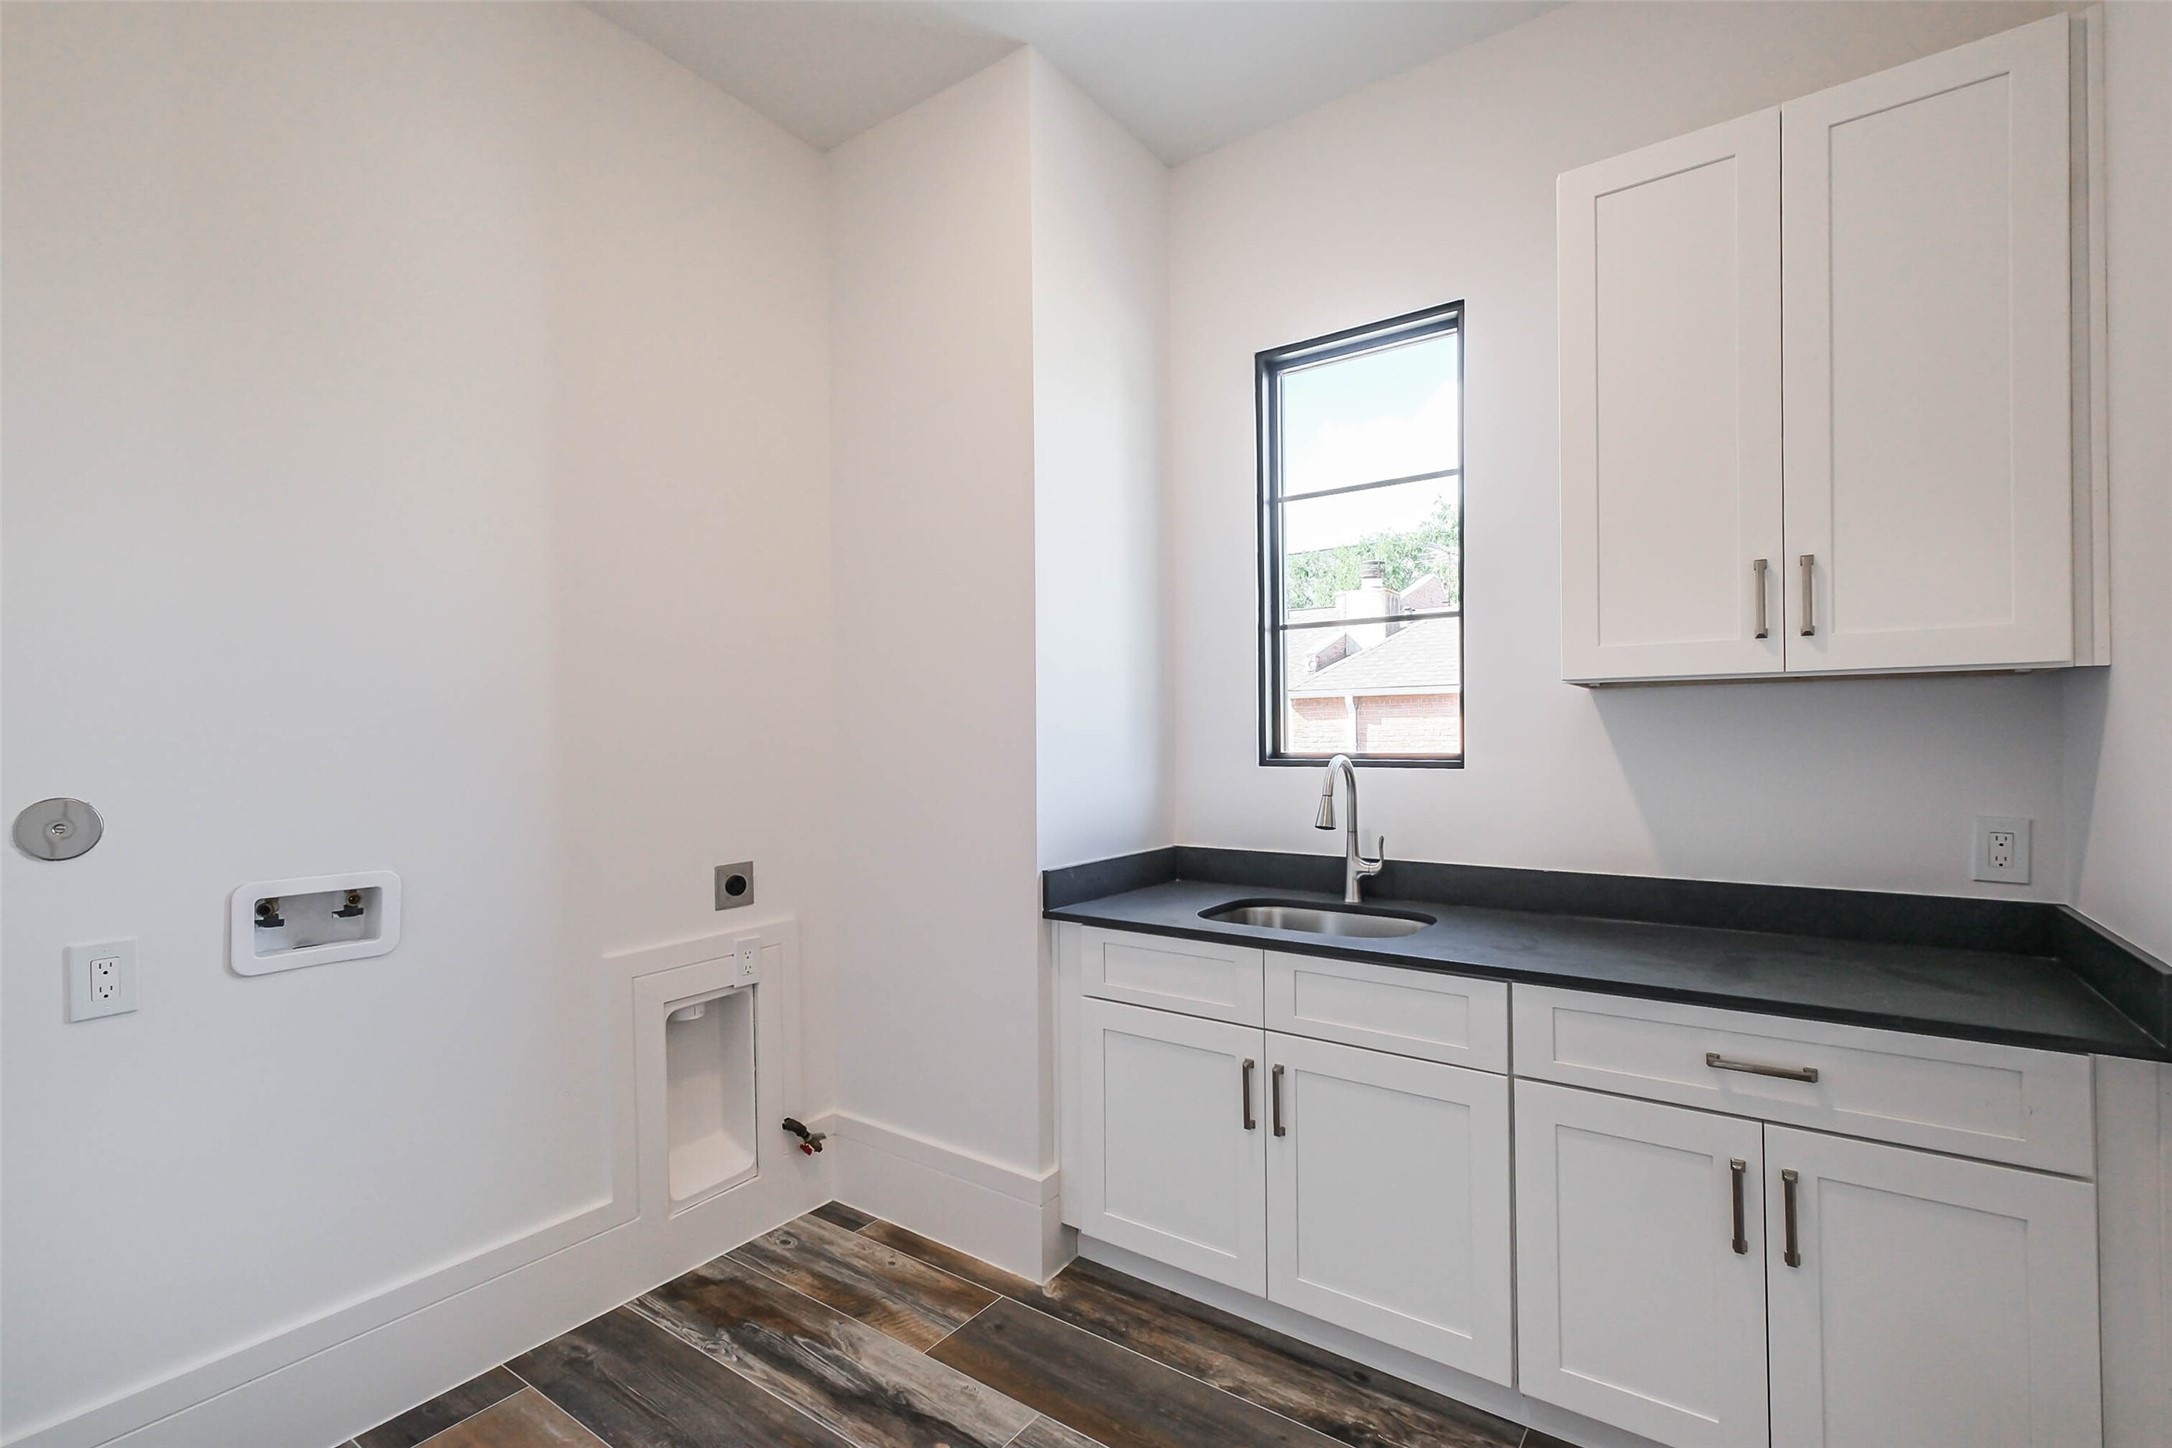 Utility Room features sink, cabinets, and countertop space. Utility Room is located on the 2nd floor.